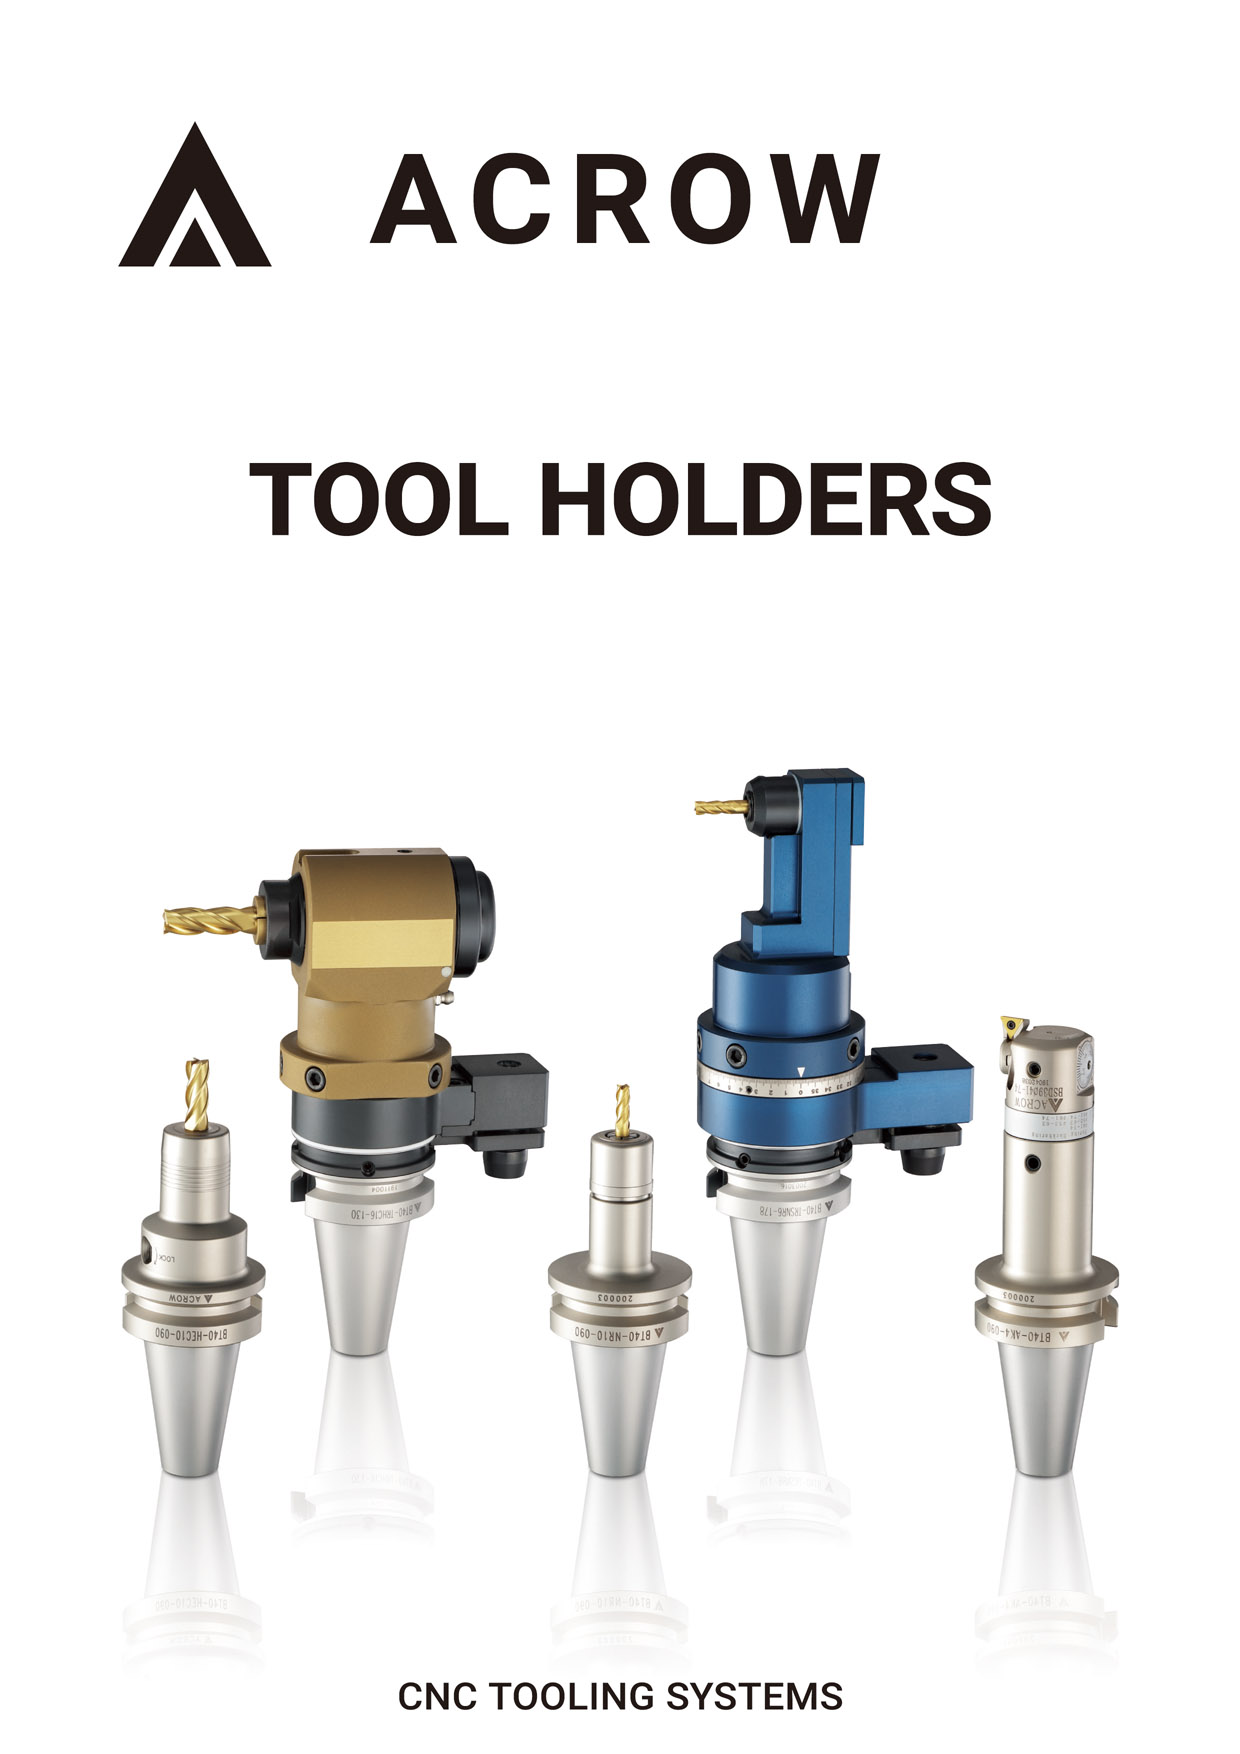 ACROW TOOL HOLDERS CATALOGUE